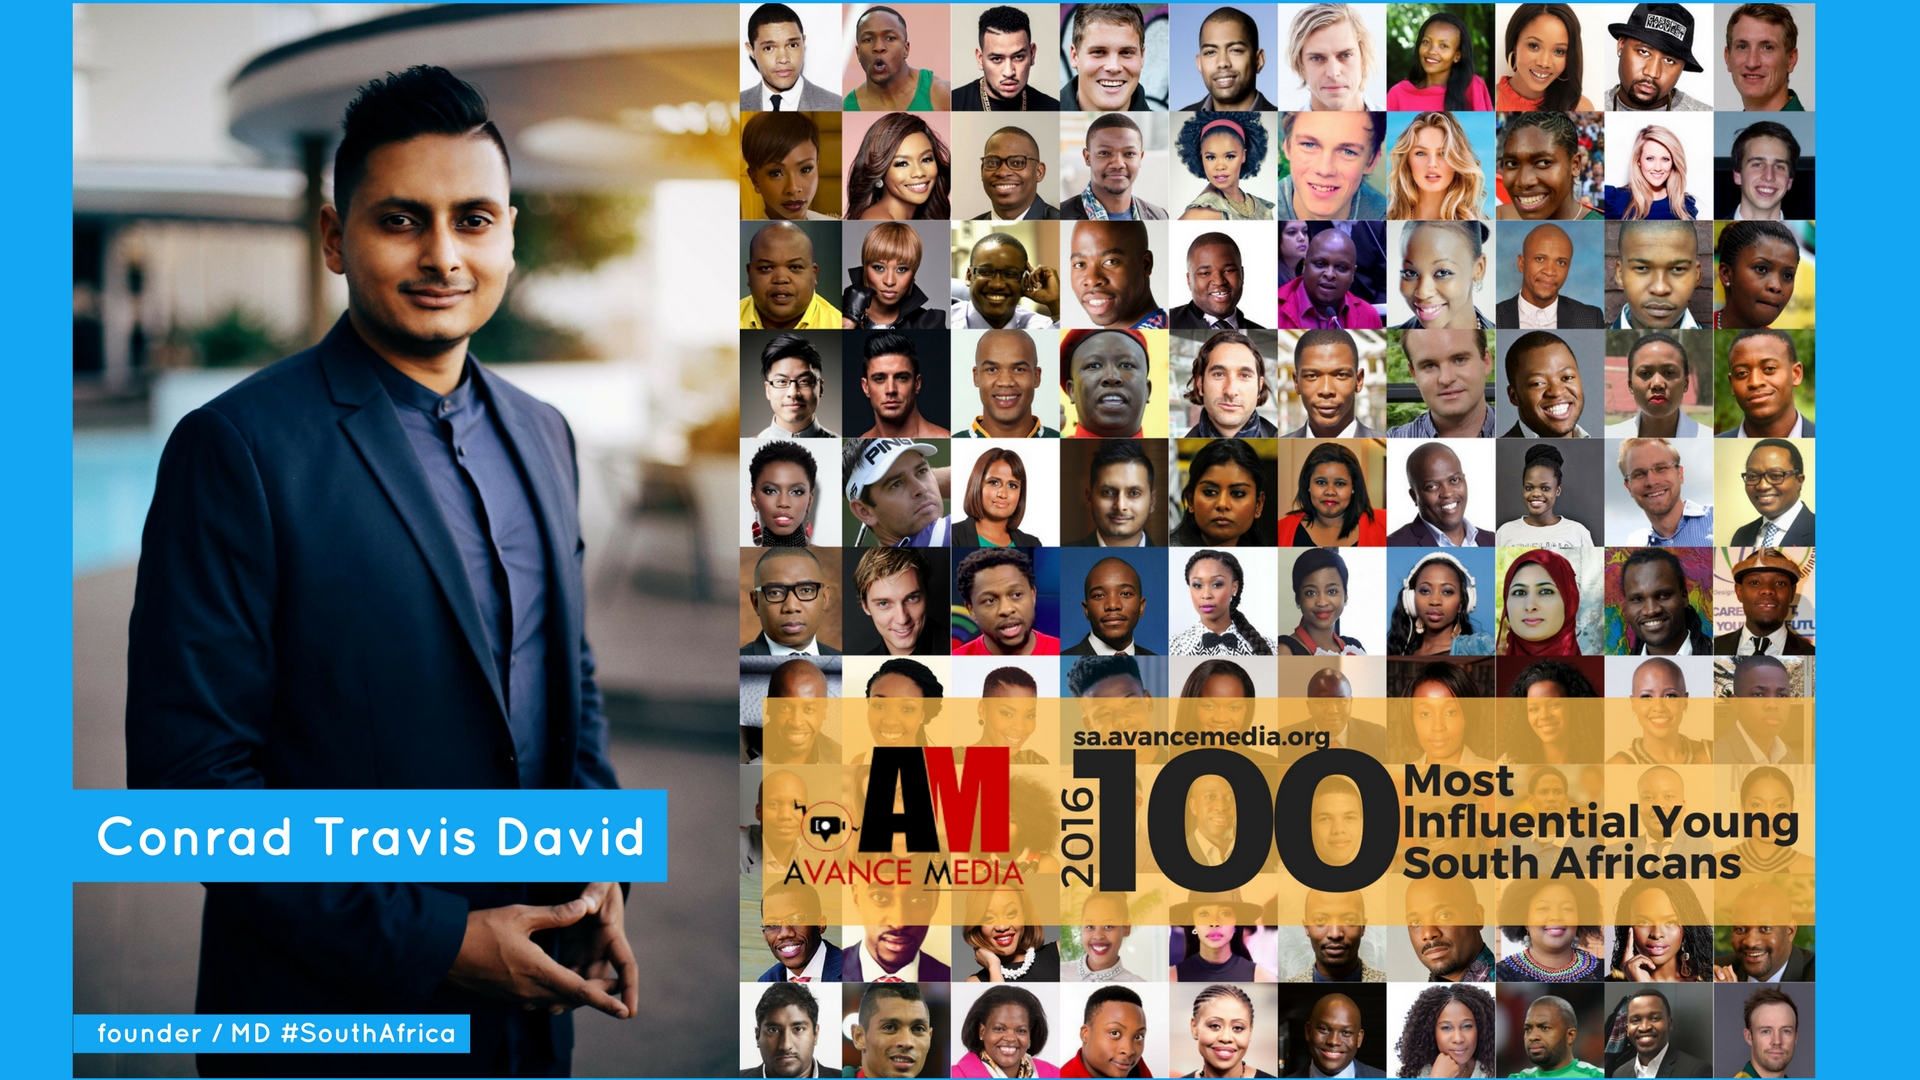 Our CEO Ranked 71 of 100 Most Influential Young South Africans 2016